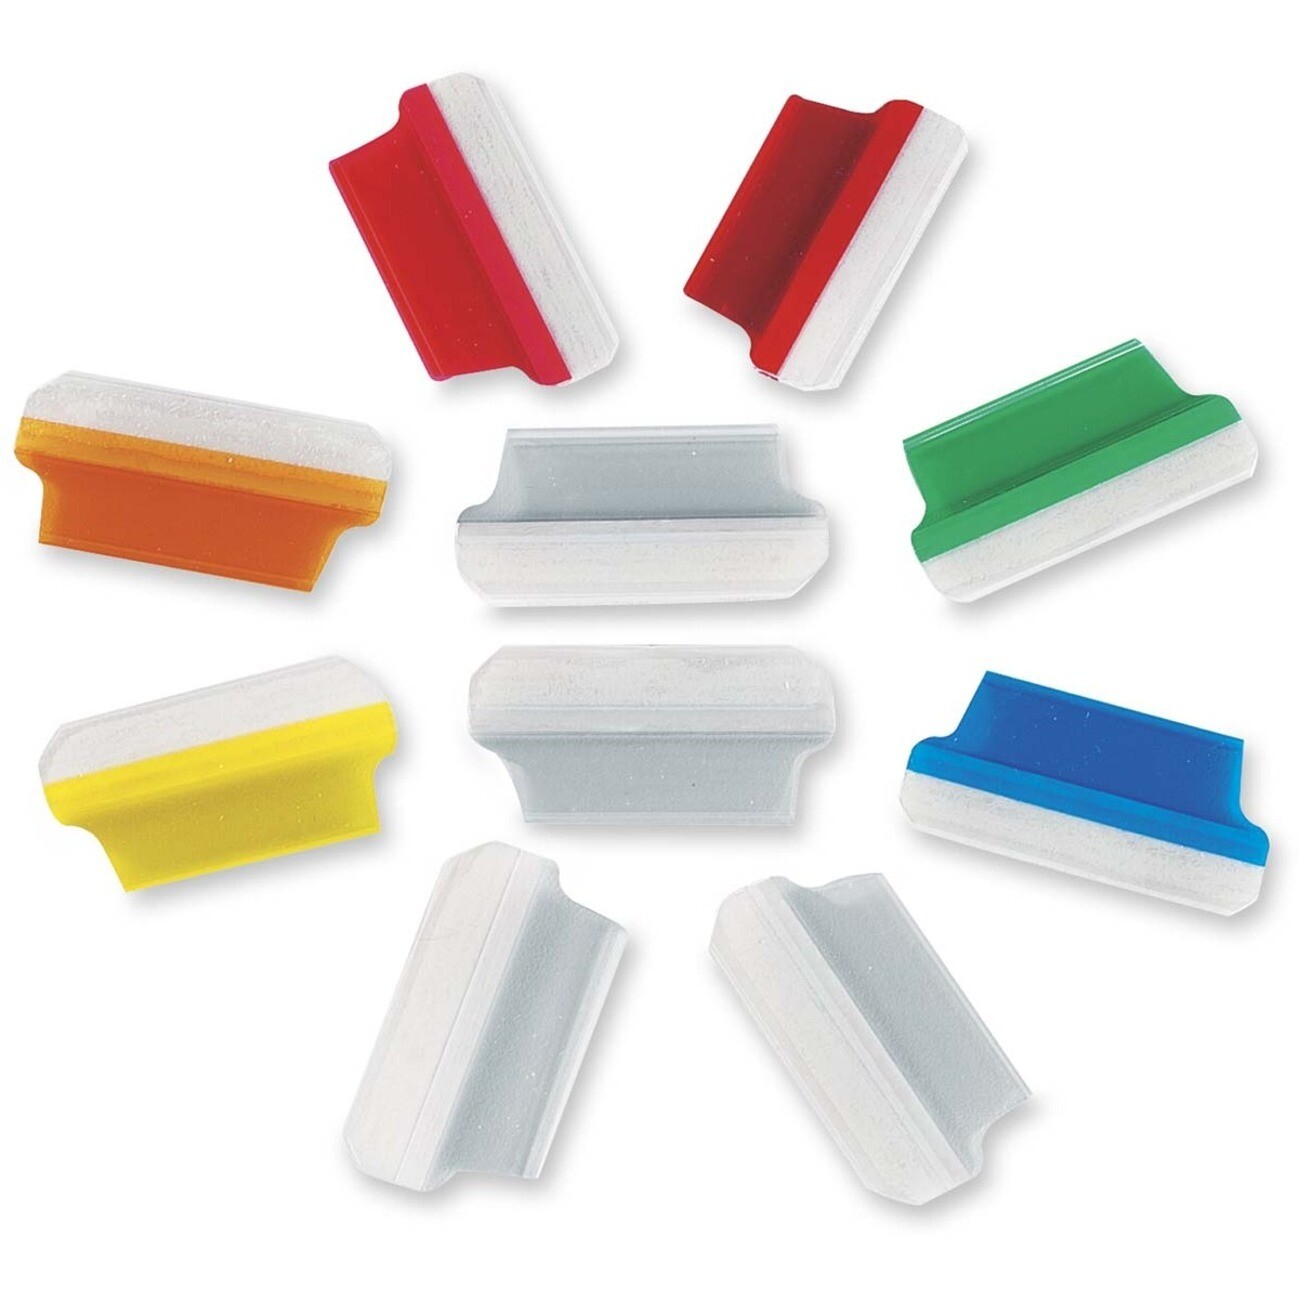 Index Tab, Self-Adhesive 1.5", Assorted Colour, 10 Pack